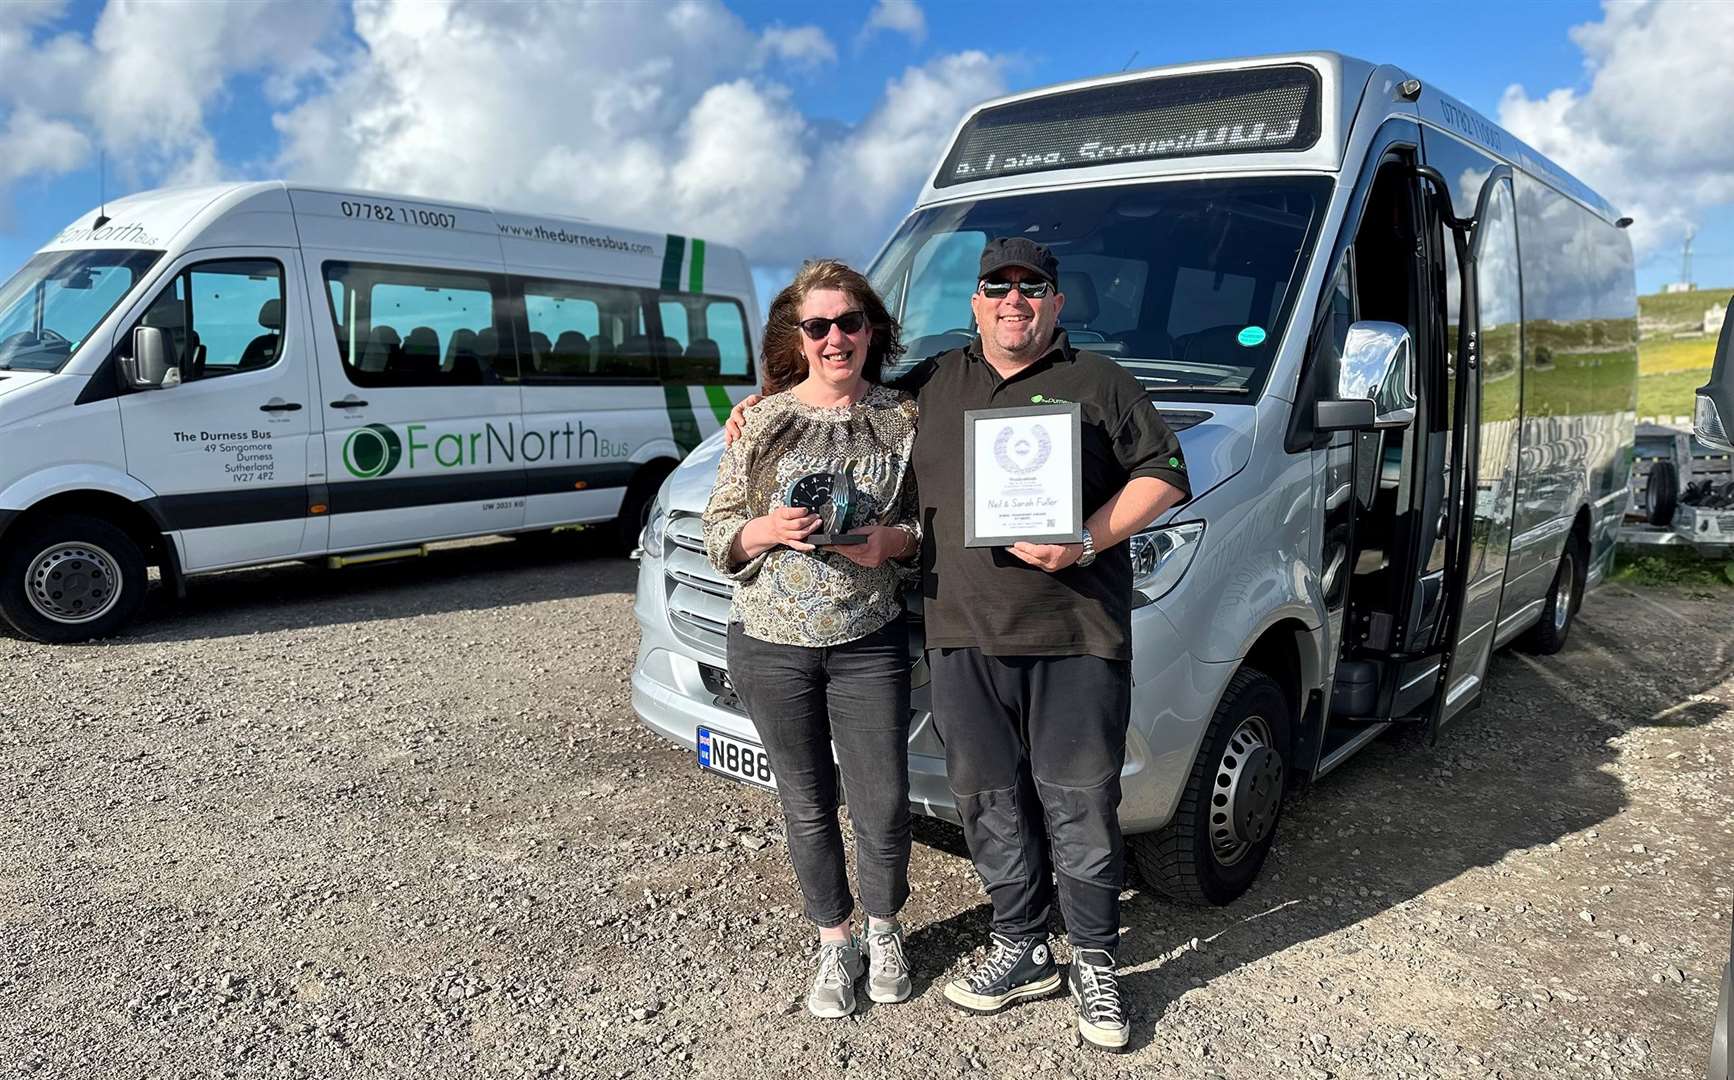 Neil and Sarah Fuller of Durness Bus after receiving their award last year.